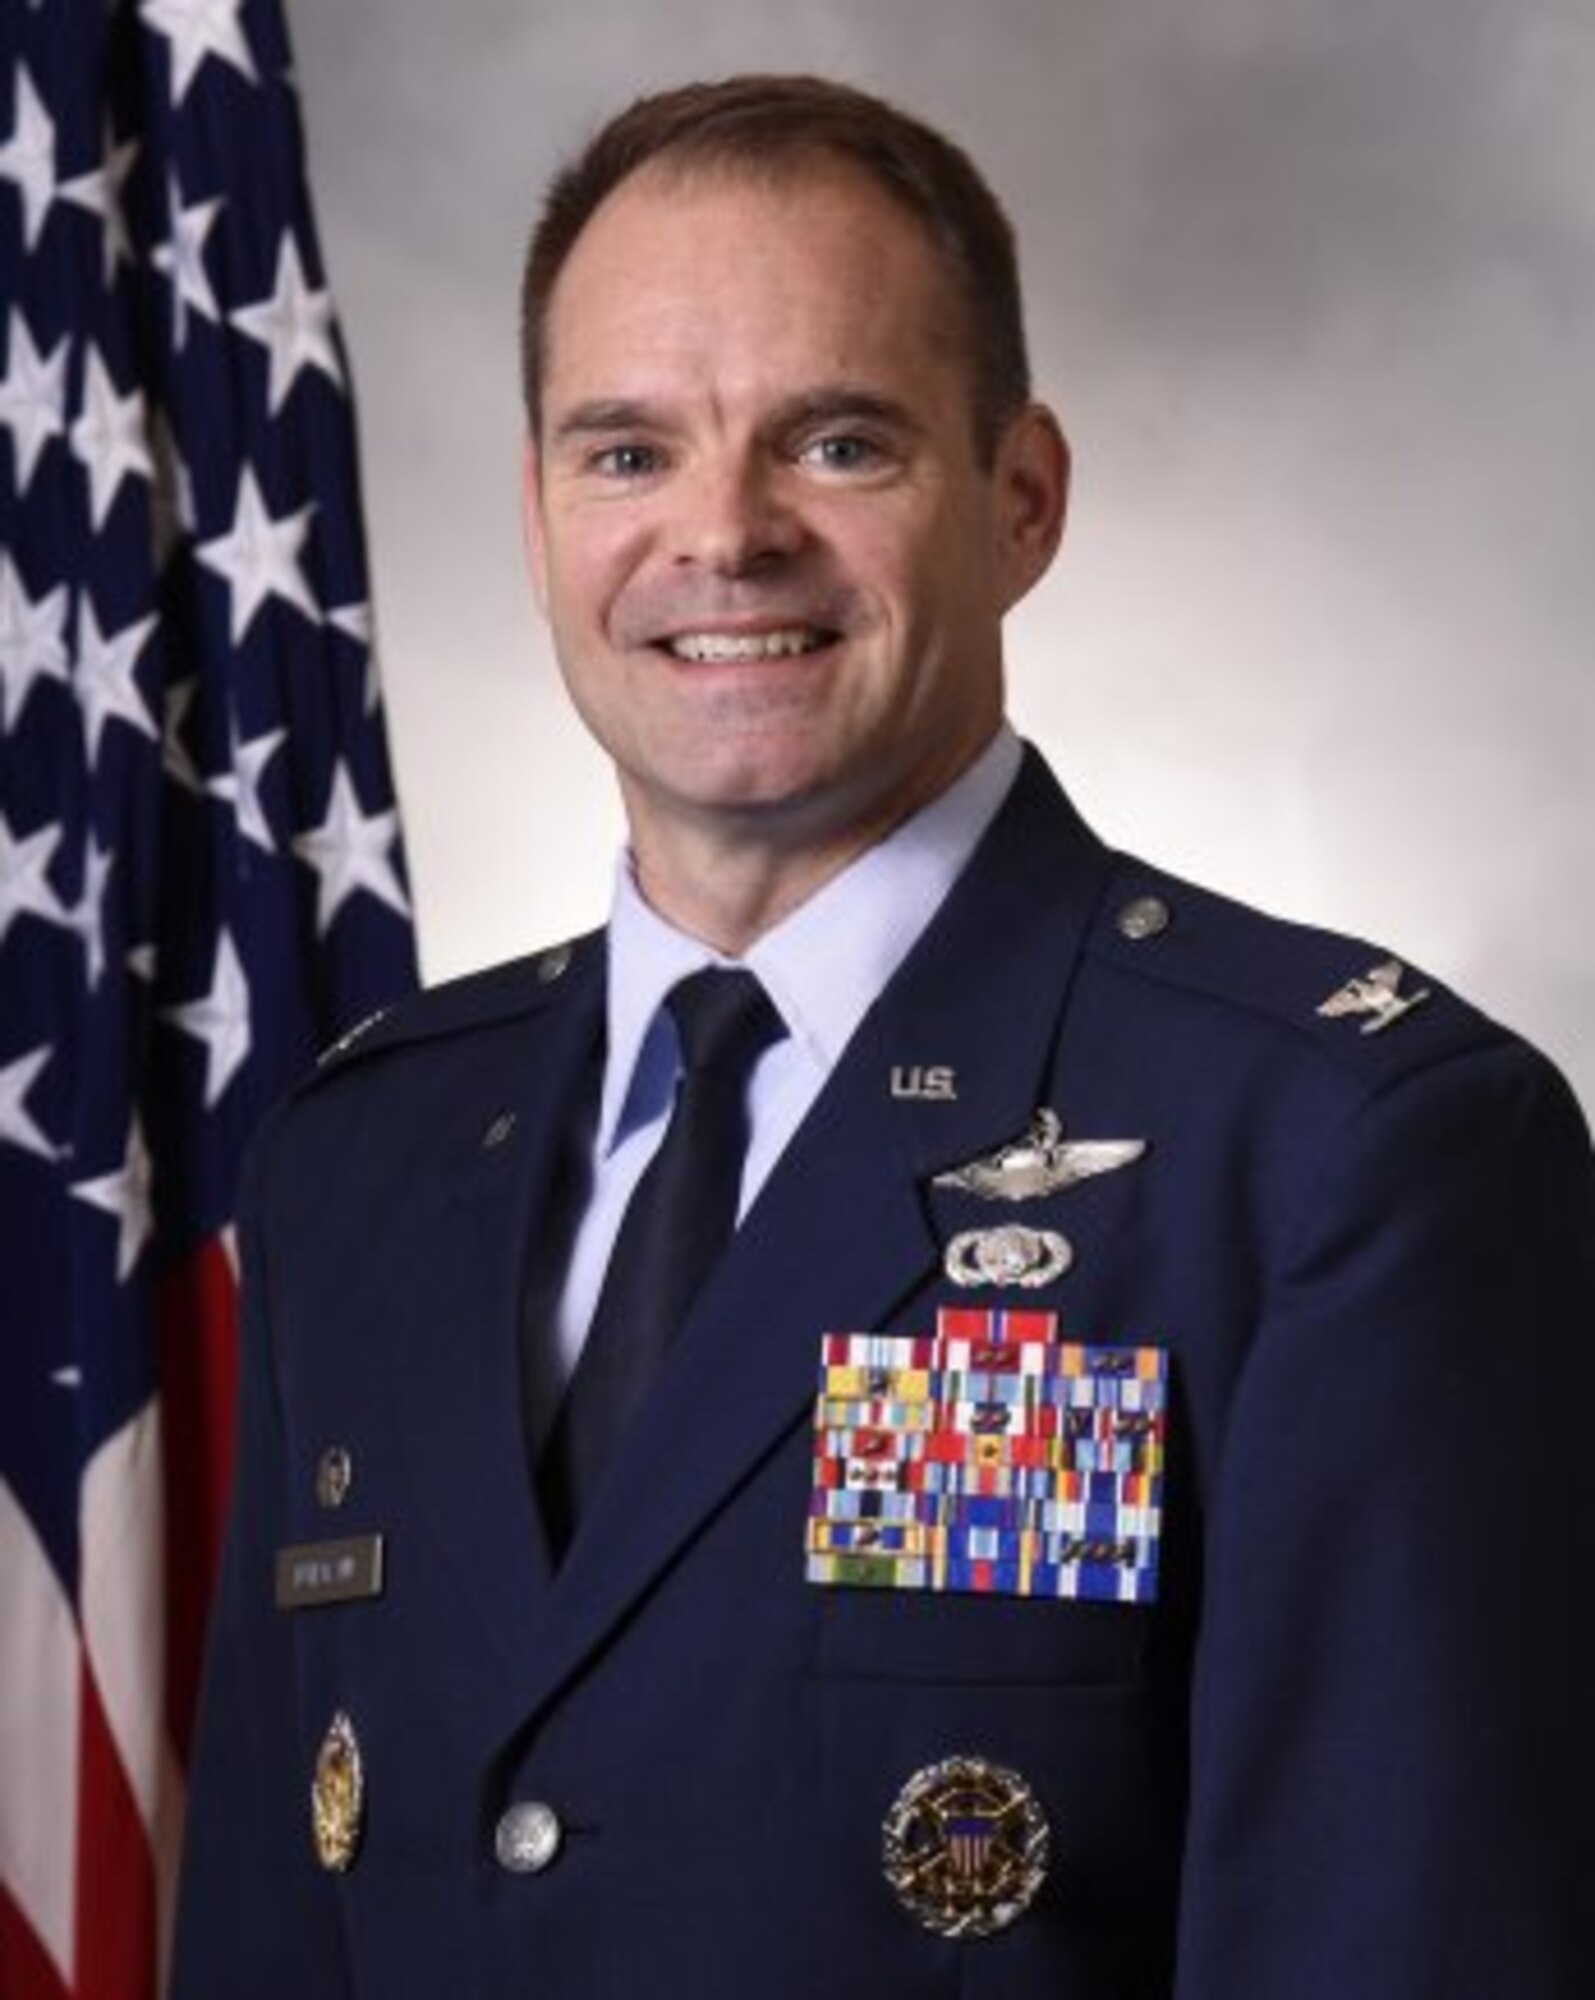 Colonel Mark S. Fuhrmann is the Commander, 62nd Operations Group, Joint Base Lewis-McChord, Washington. He ensures the combat readiness of approximately 700 active duty military and civilian personnel in four squadrons, operating 48 C-17A Globemaster III aircraft to support worldwide combat and humanitarian airlift and airdrop operations.